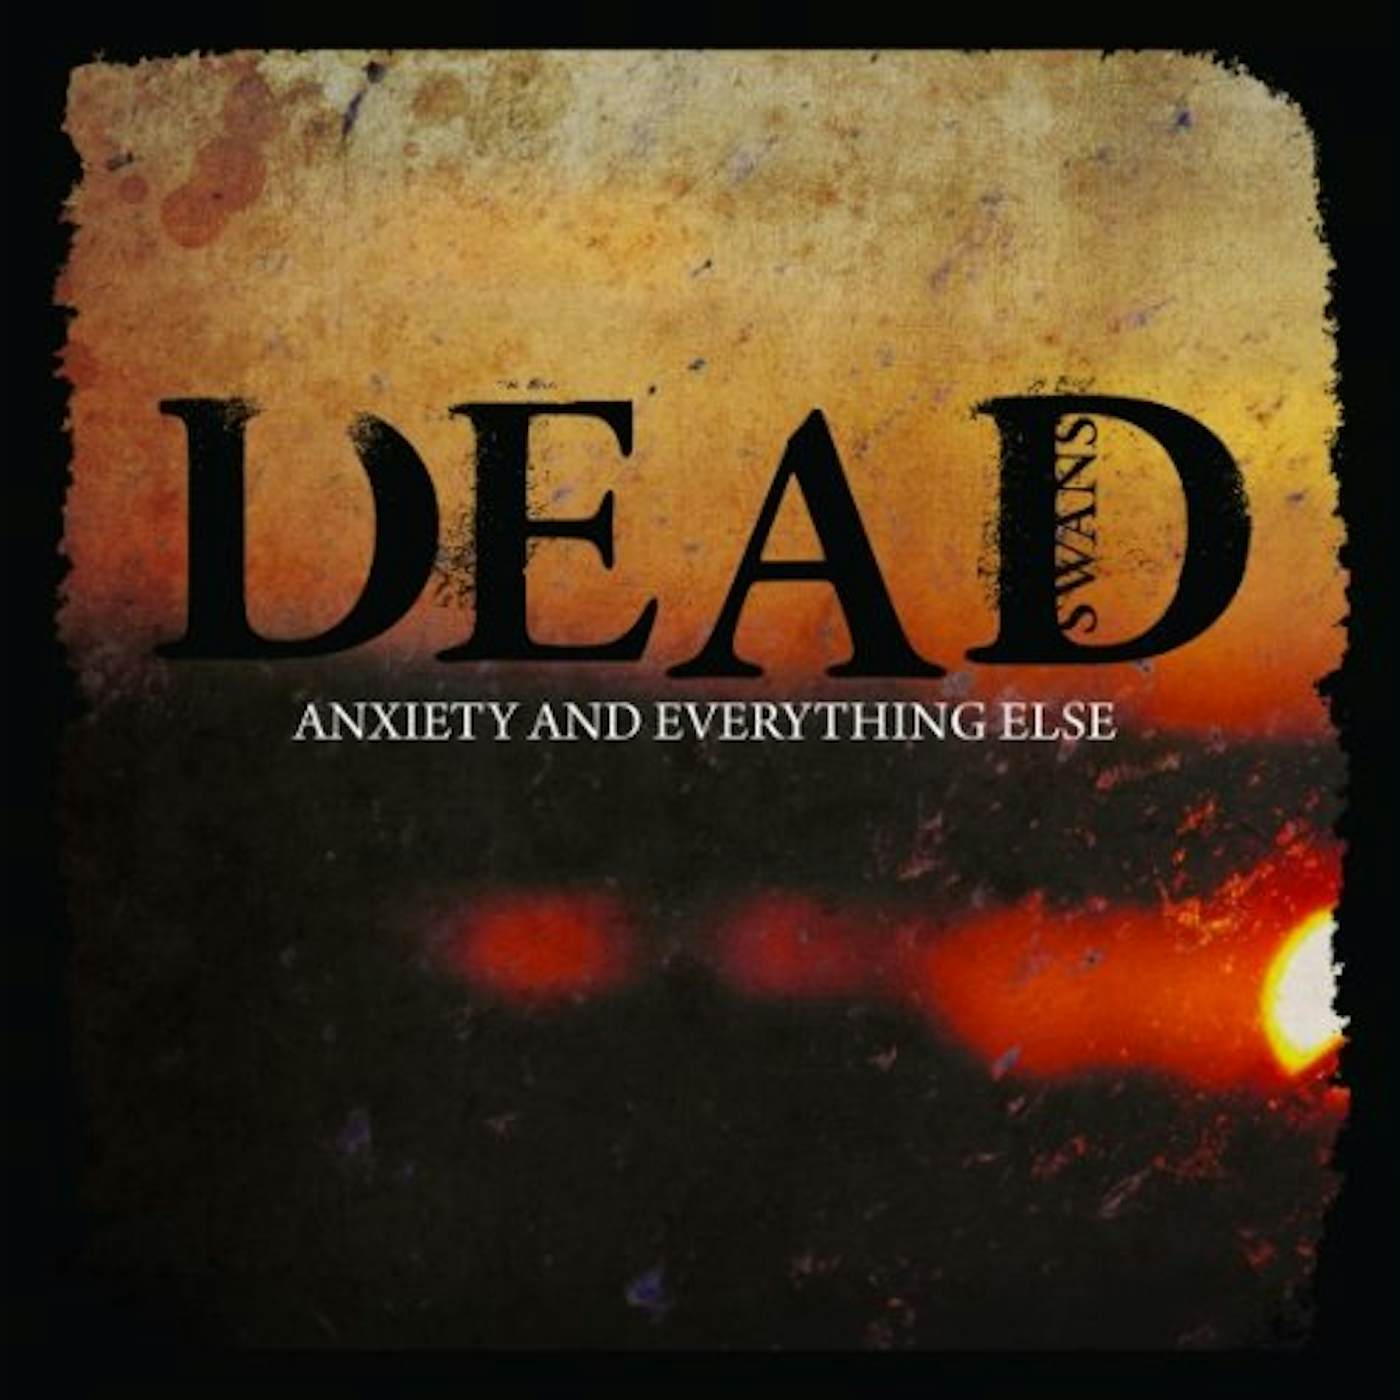 Dead Swans Anxiety And Everything Else Vinyl Record